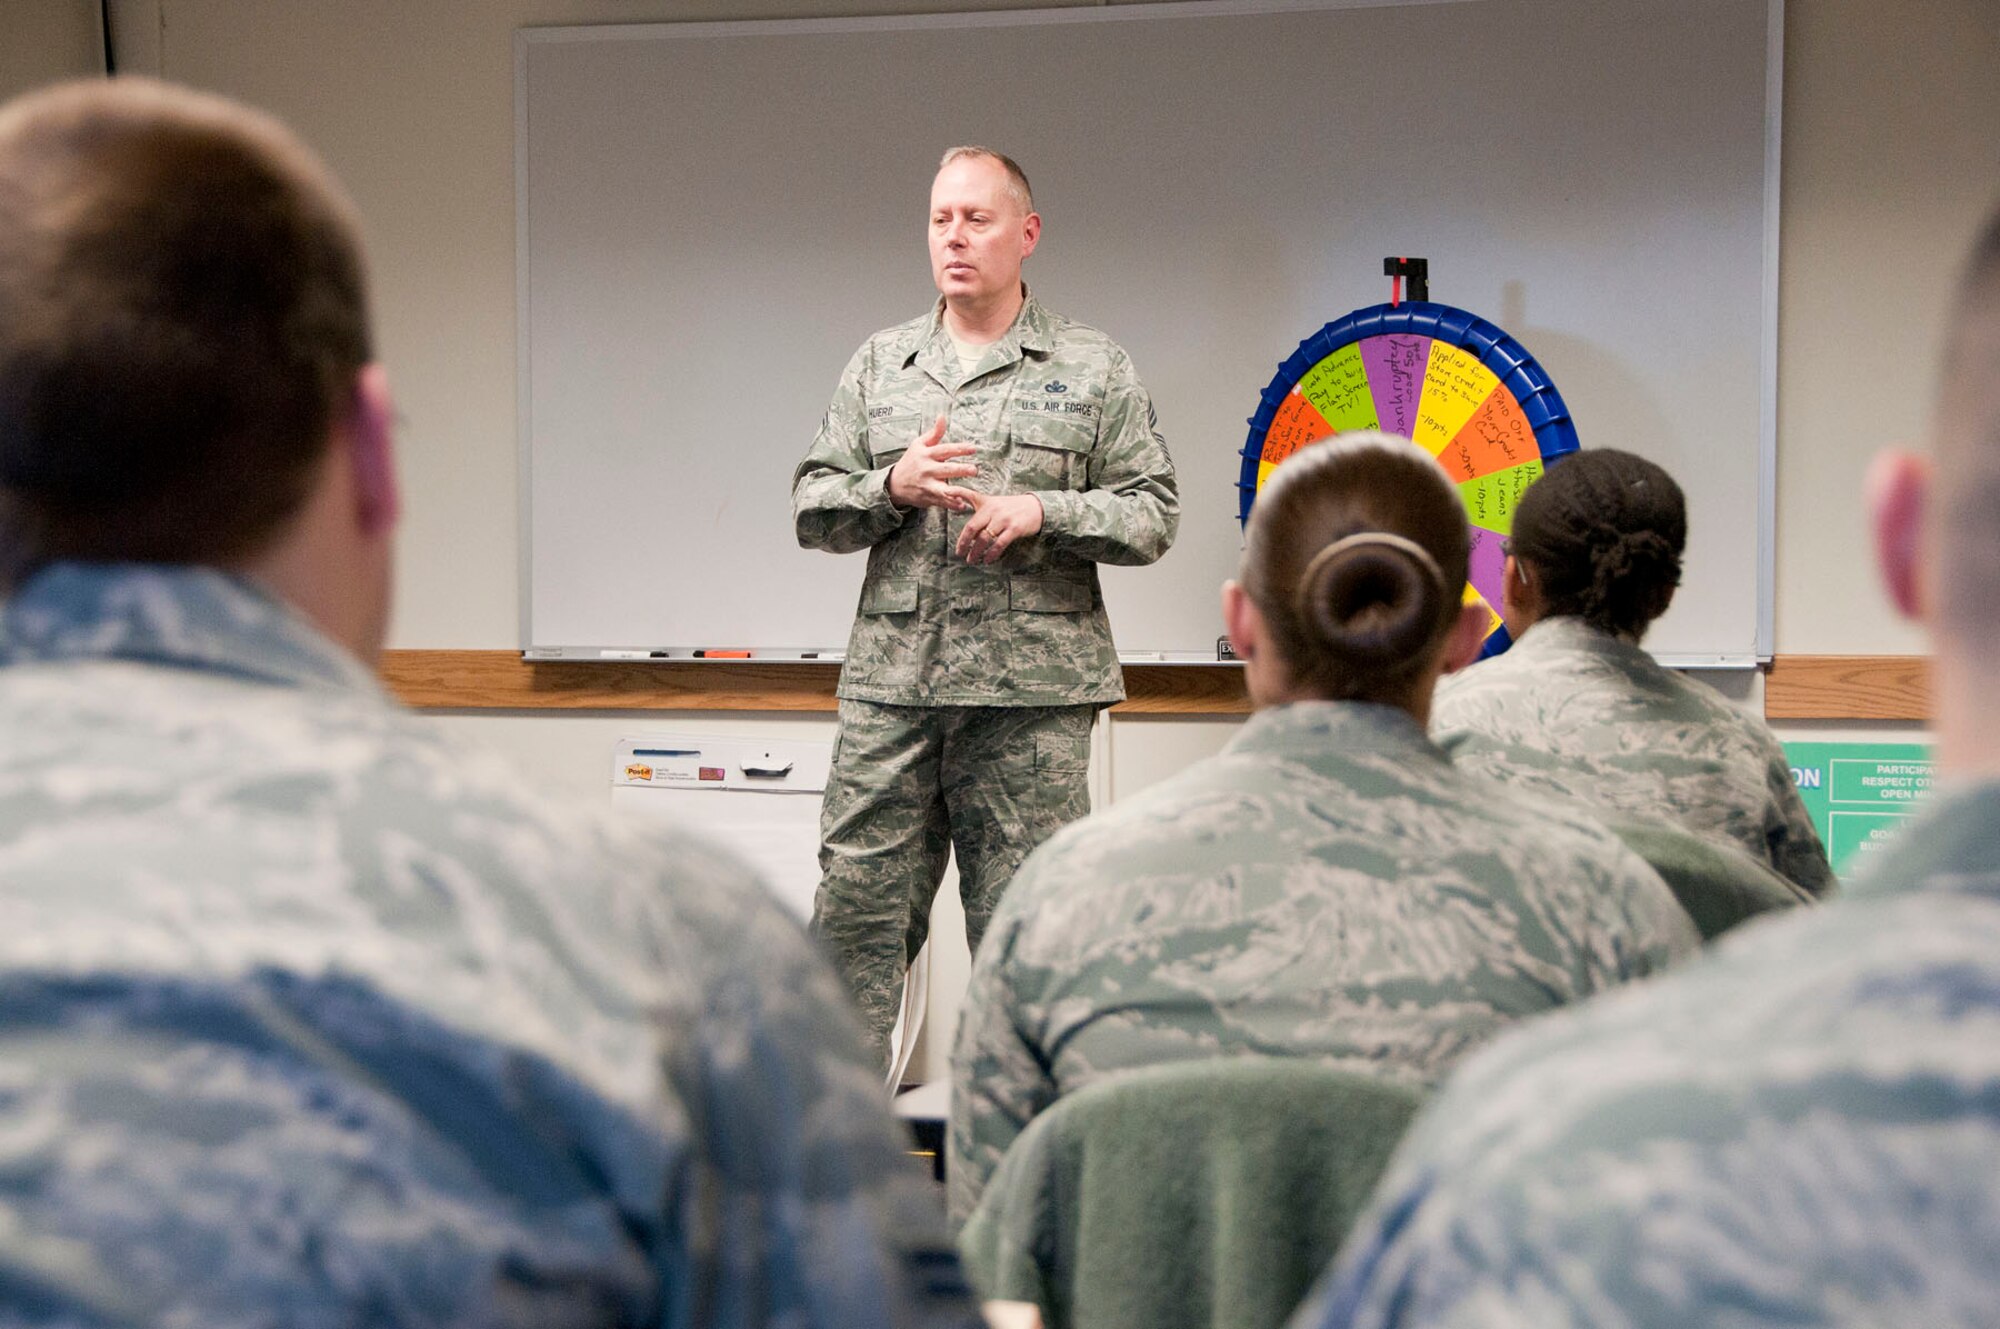 HANSCOM AIR FORCE BASE, Mass. – Chief Master Sgt. David Huerd, 66th Air Base Group superintendent and Hanscom’s senior enlisted advisor, speaks to Airmen during a First Term Airman Center class Feb. 22. In his new role, Huerd will serve as the voice of the base’s enlisted force and work with the installation commander to secure, sustain and support Hanscom. (U.S. Air Force photo by Mark Wyatt)